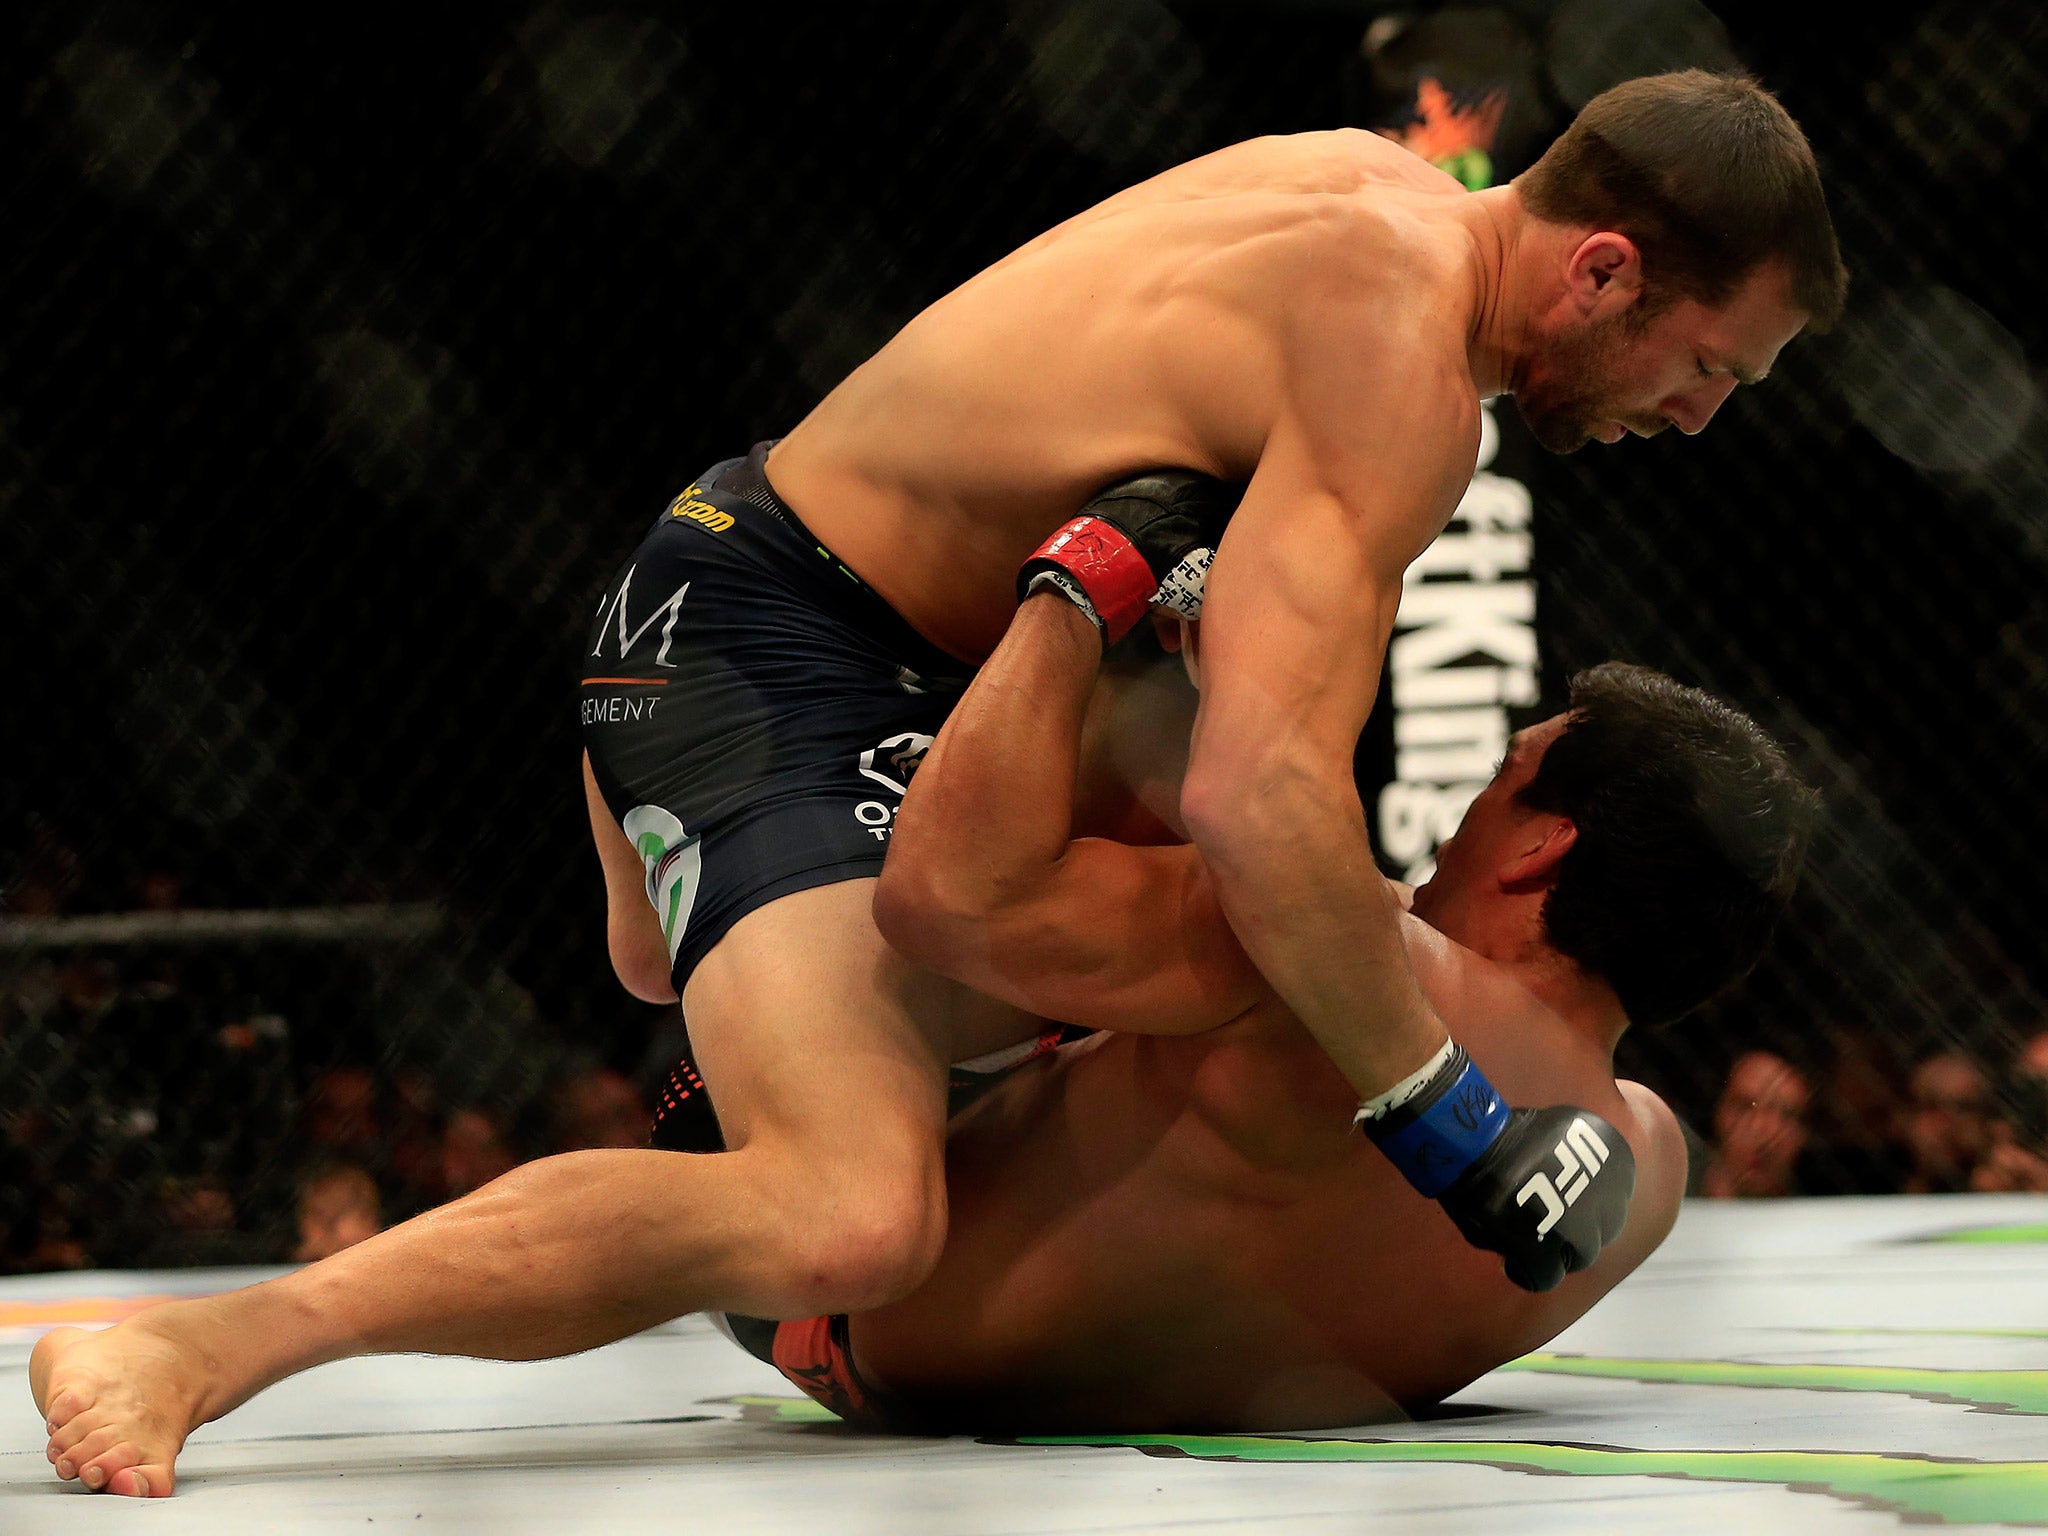 Machida lost to current UFC middleweight champion Luke Rockhold in April 2015